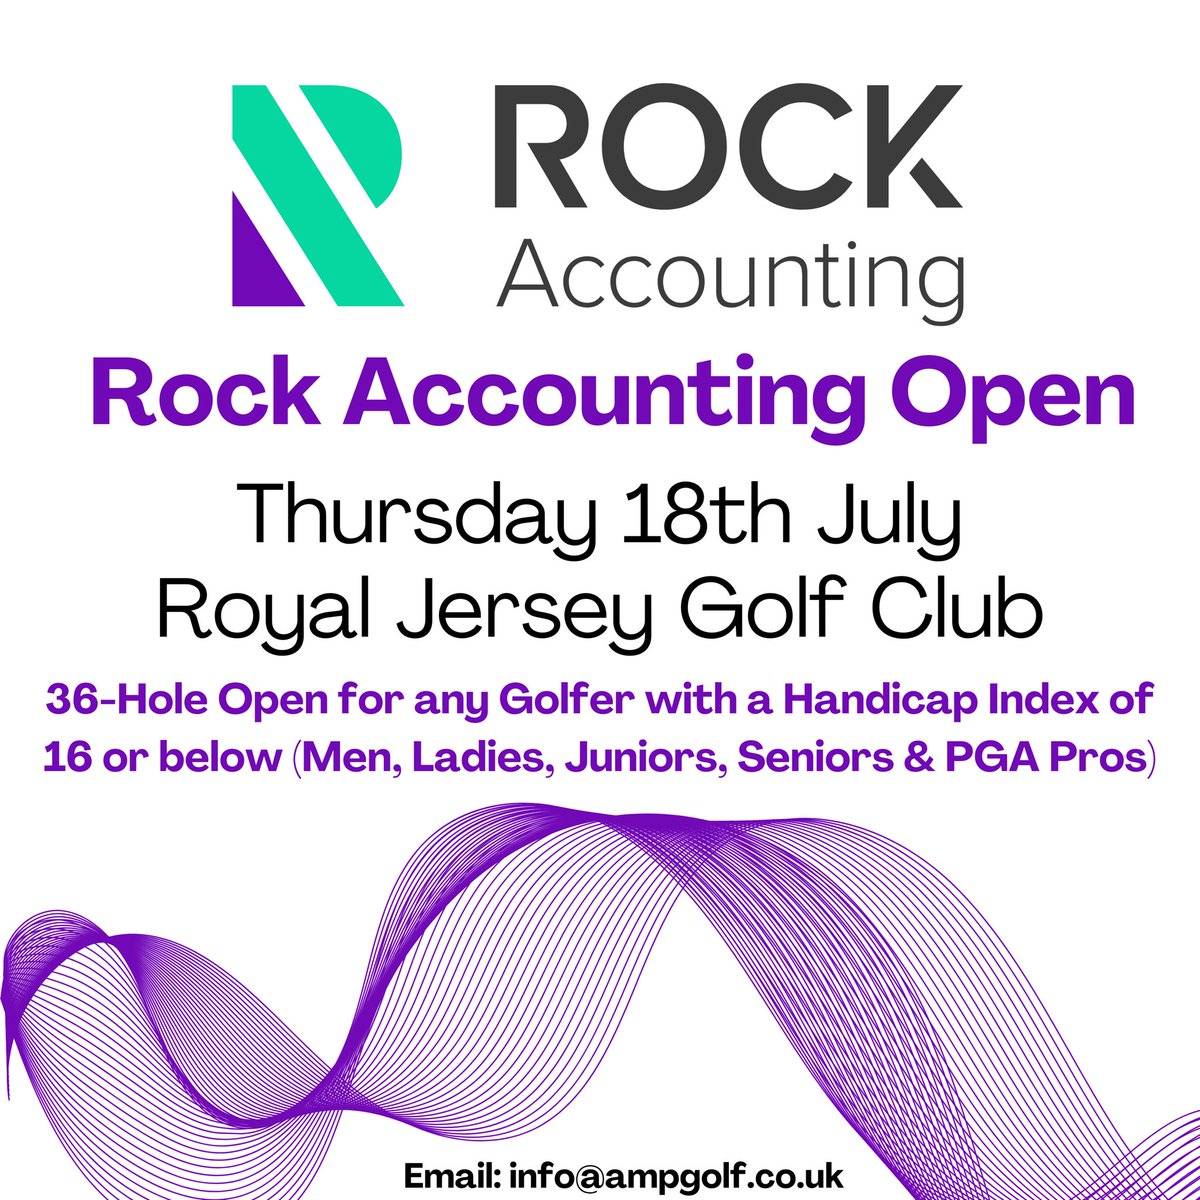 Rock Accounting Open 2024 is now open for entries! ⛳️ Only 48 spots available in this @jersey_golf Order of Merit event. Open to all players with a Handicap Index of 16 or below. Sign up now! ✍️ #jerseygolf #jersey #jerseysport #royaljerseygolfclub #open #rockaccounting